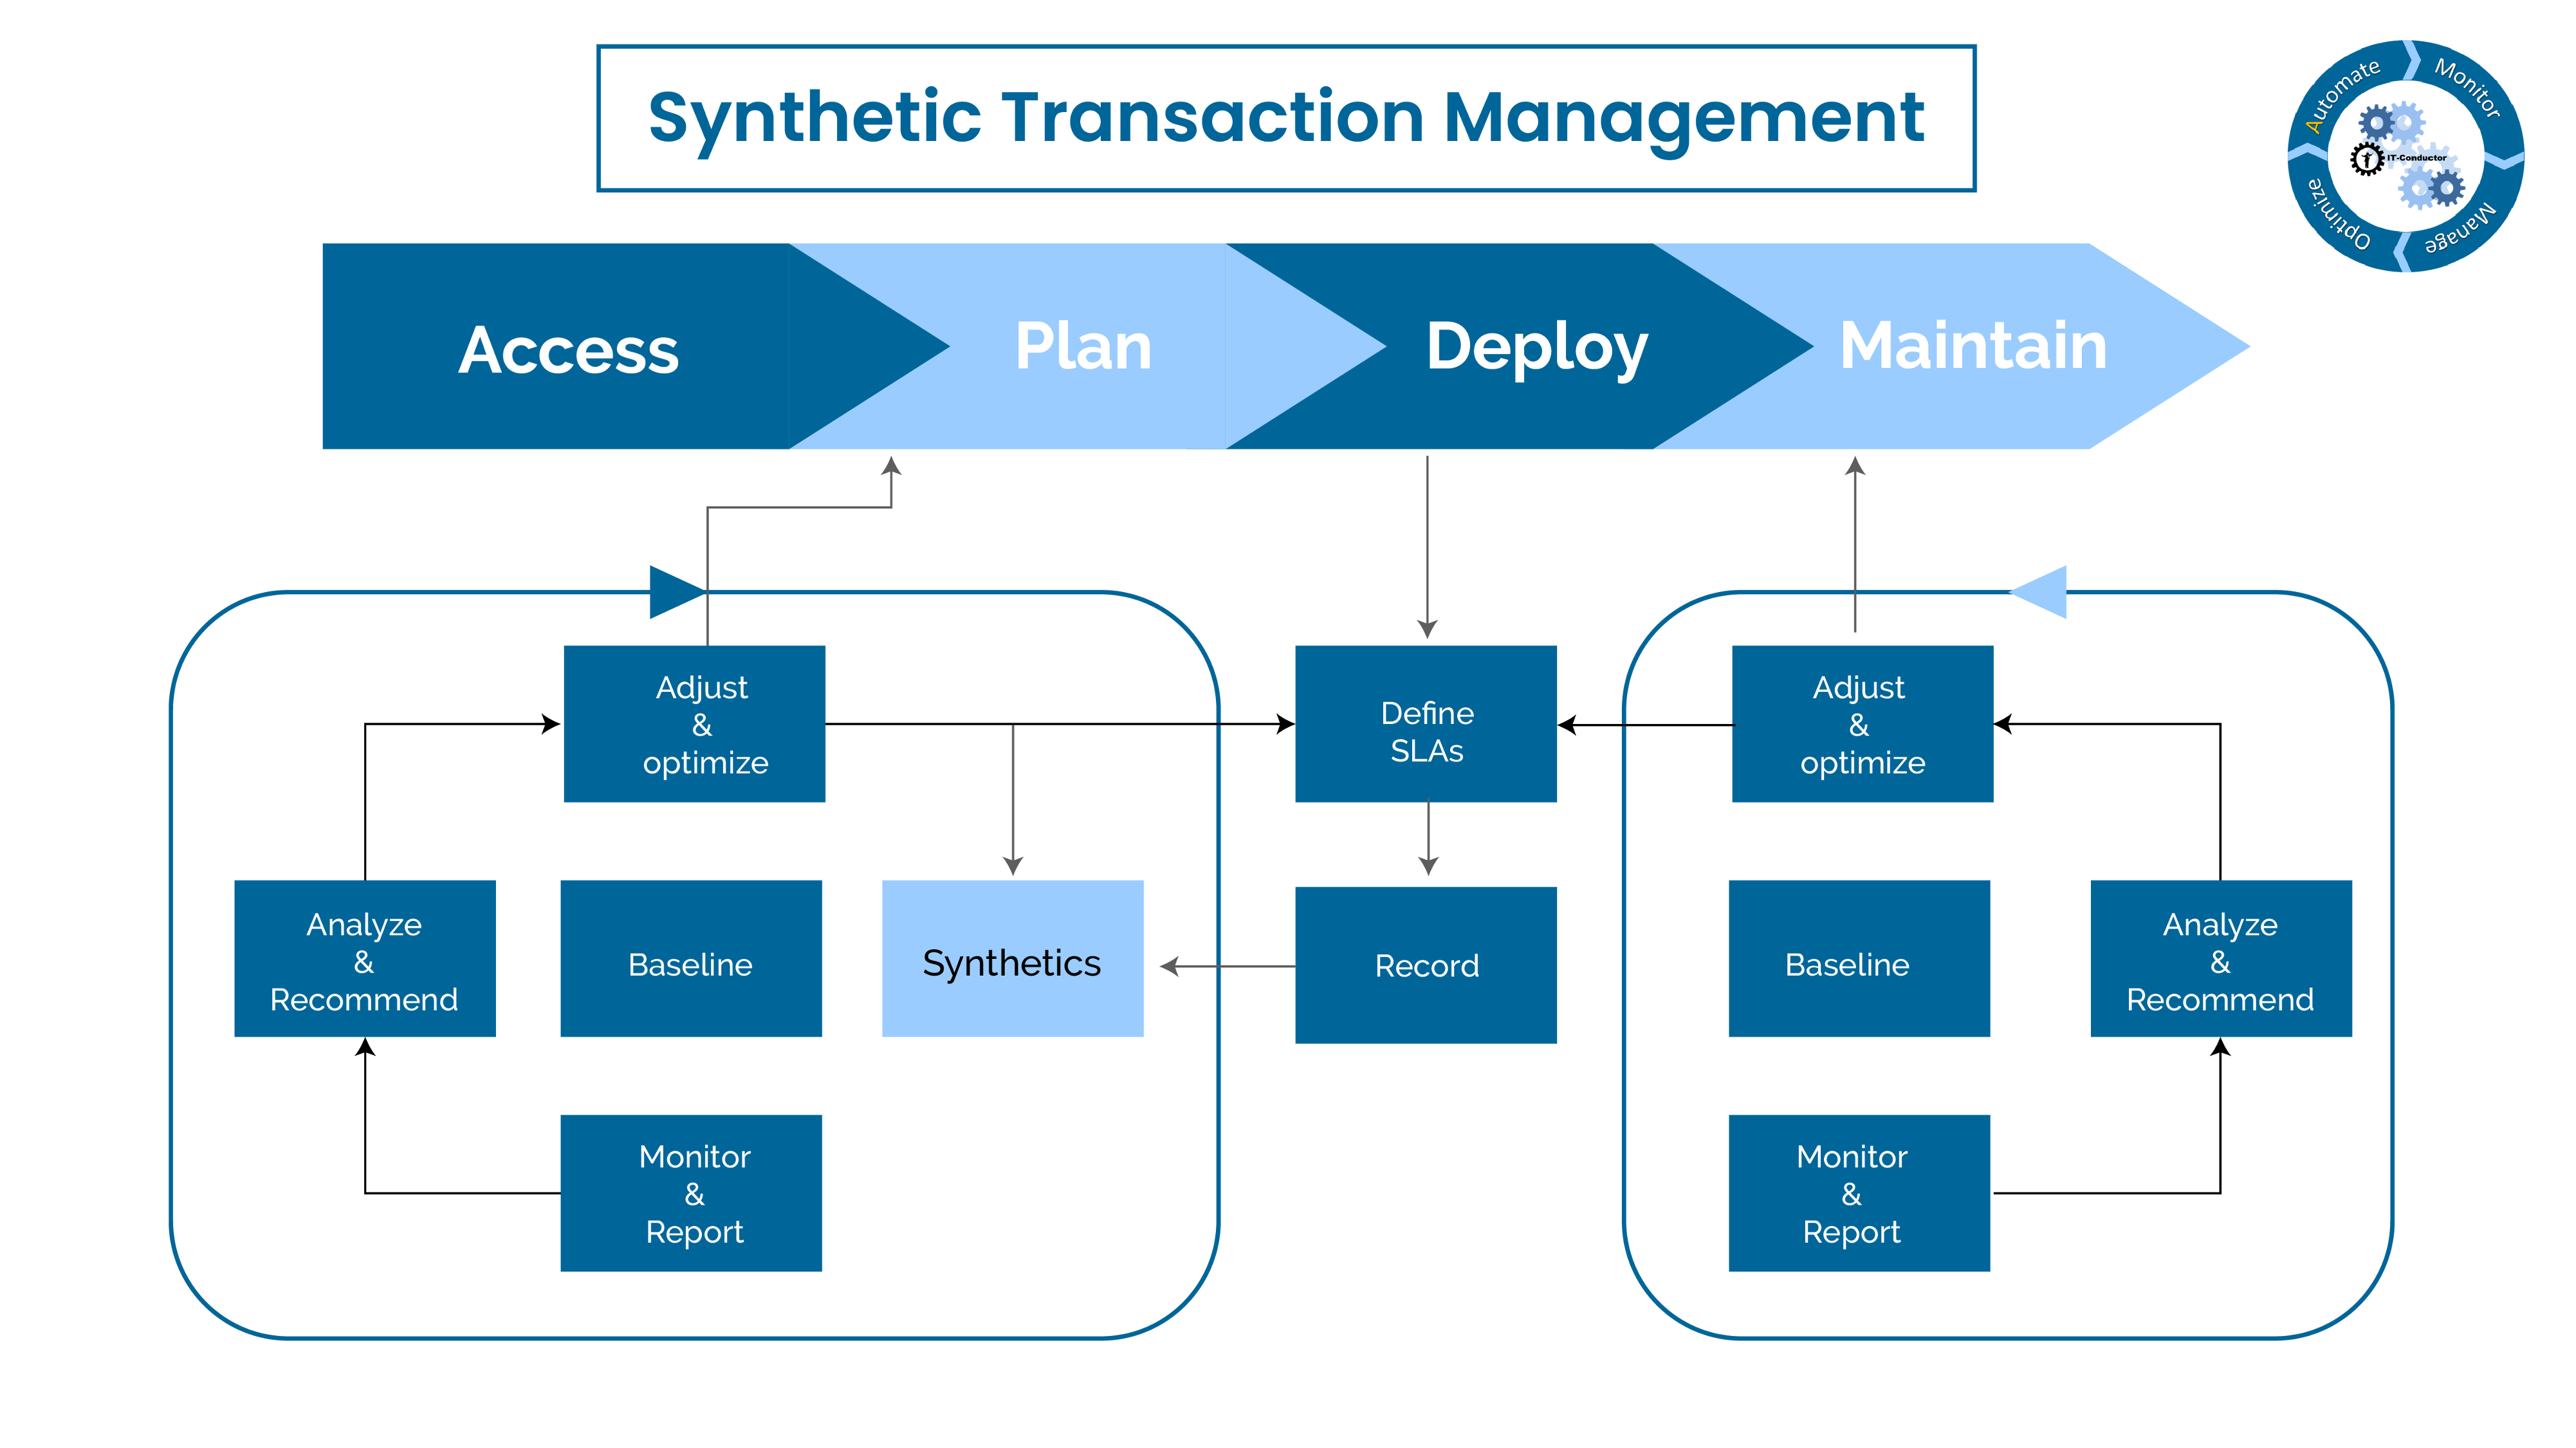 Synthetic Transaction Management